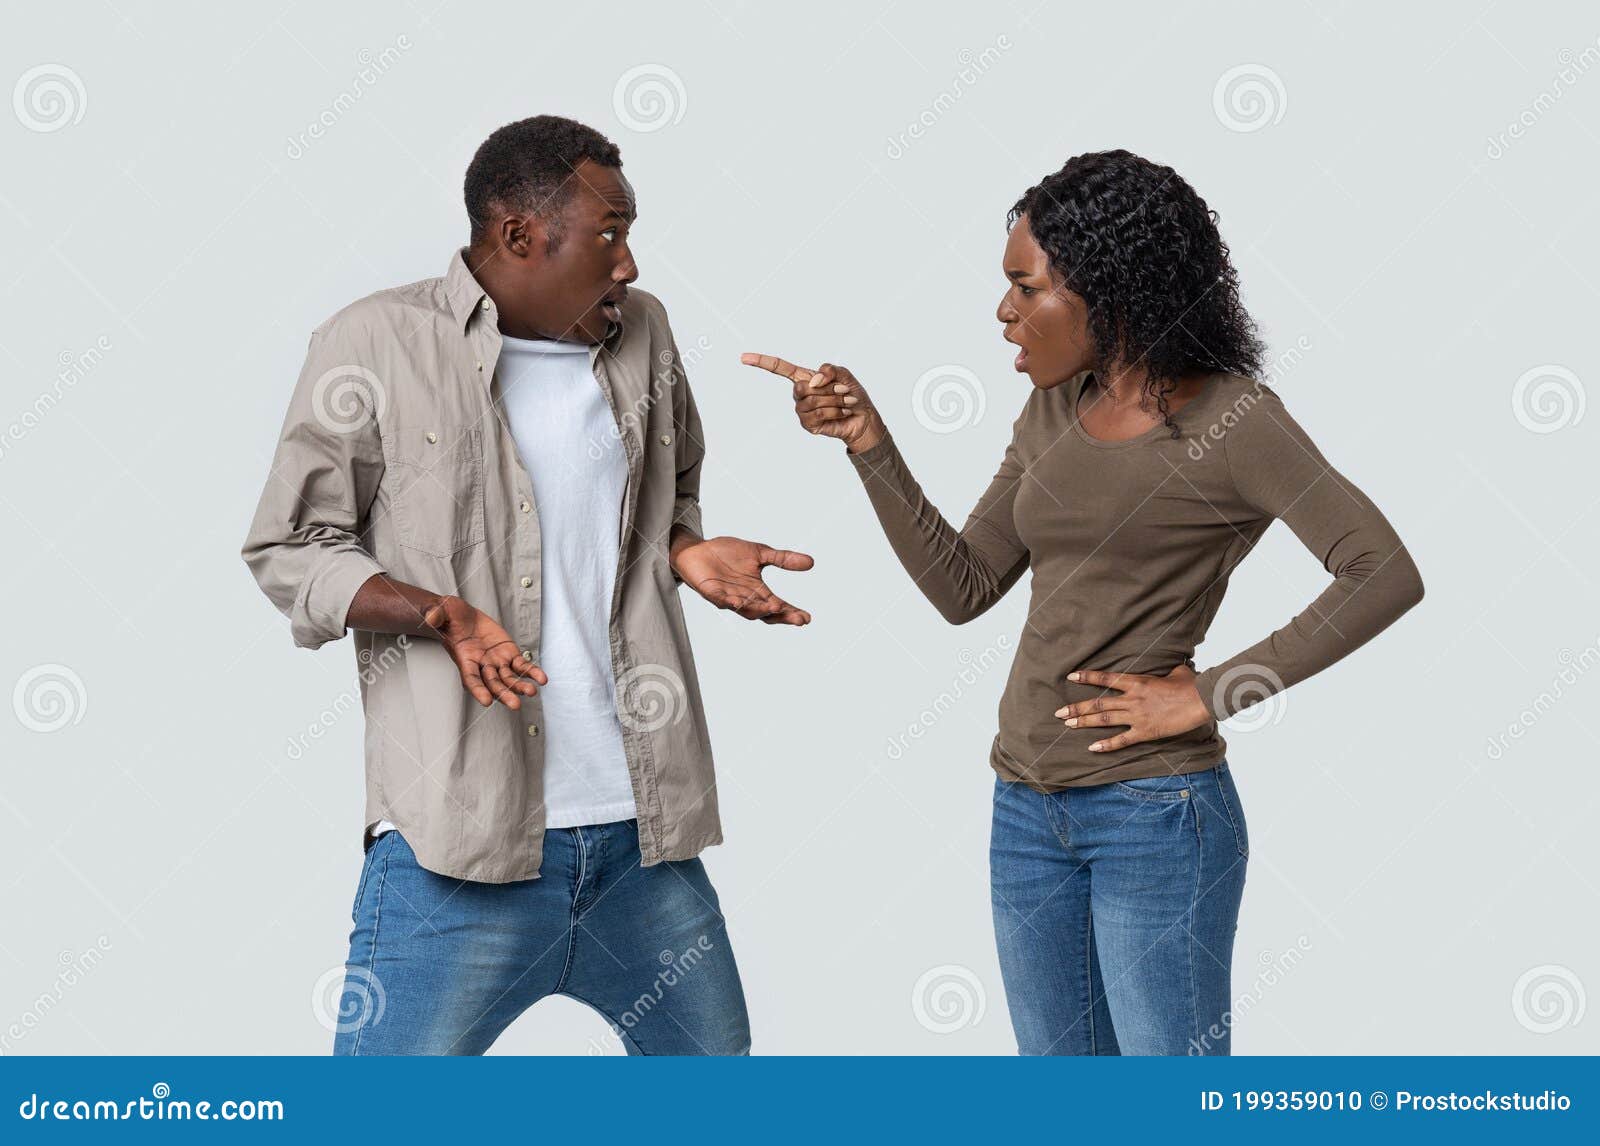 furious-african-american-young-woman-yelling-pointing-her-innocent-boyfriend-angry-black-lady-suspecting-husband-199359010.jpg